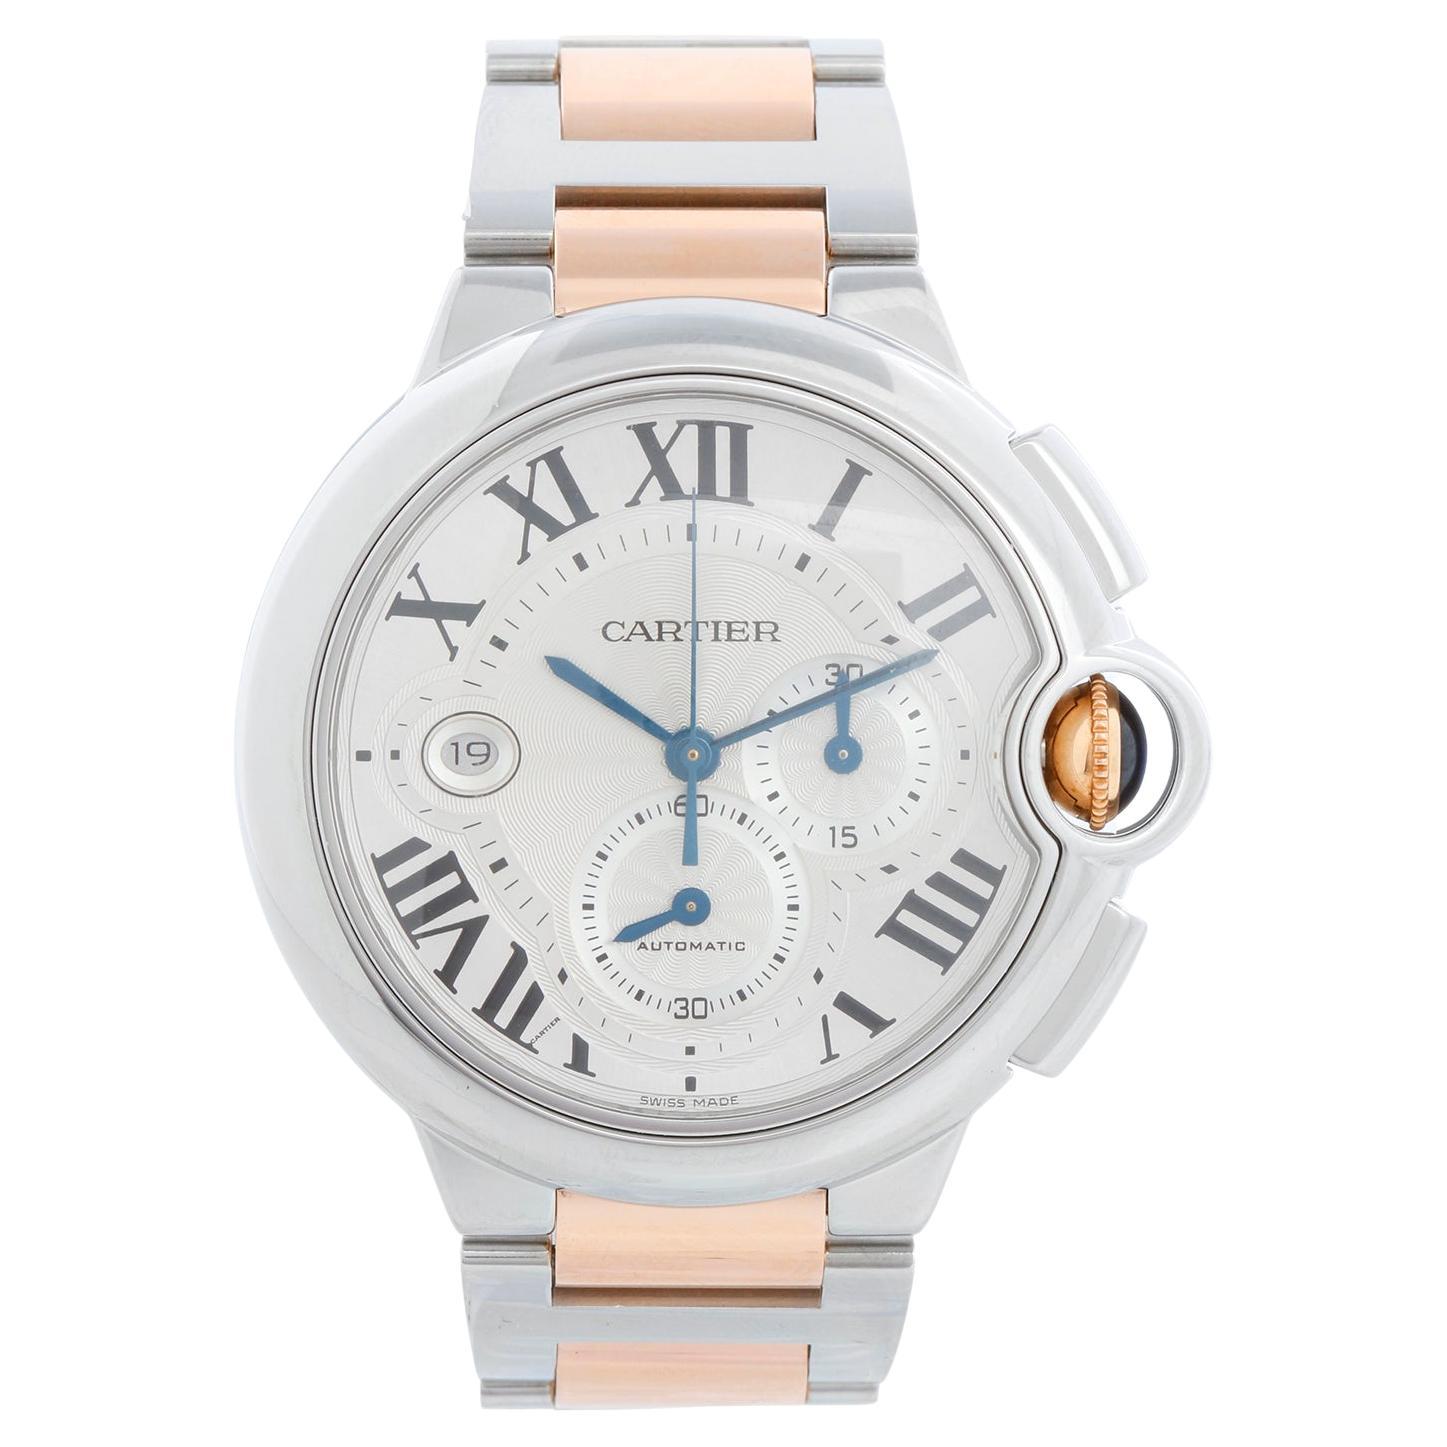 Cartier Ballon Bleu 44mm Stainless Steel & Rose Gold Chronograph W6920063 For Sale